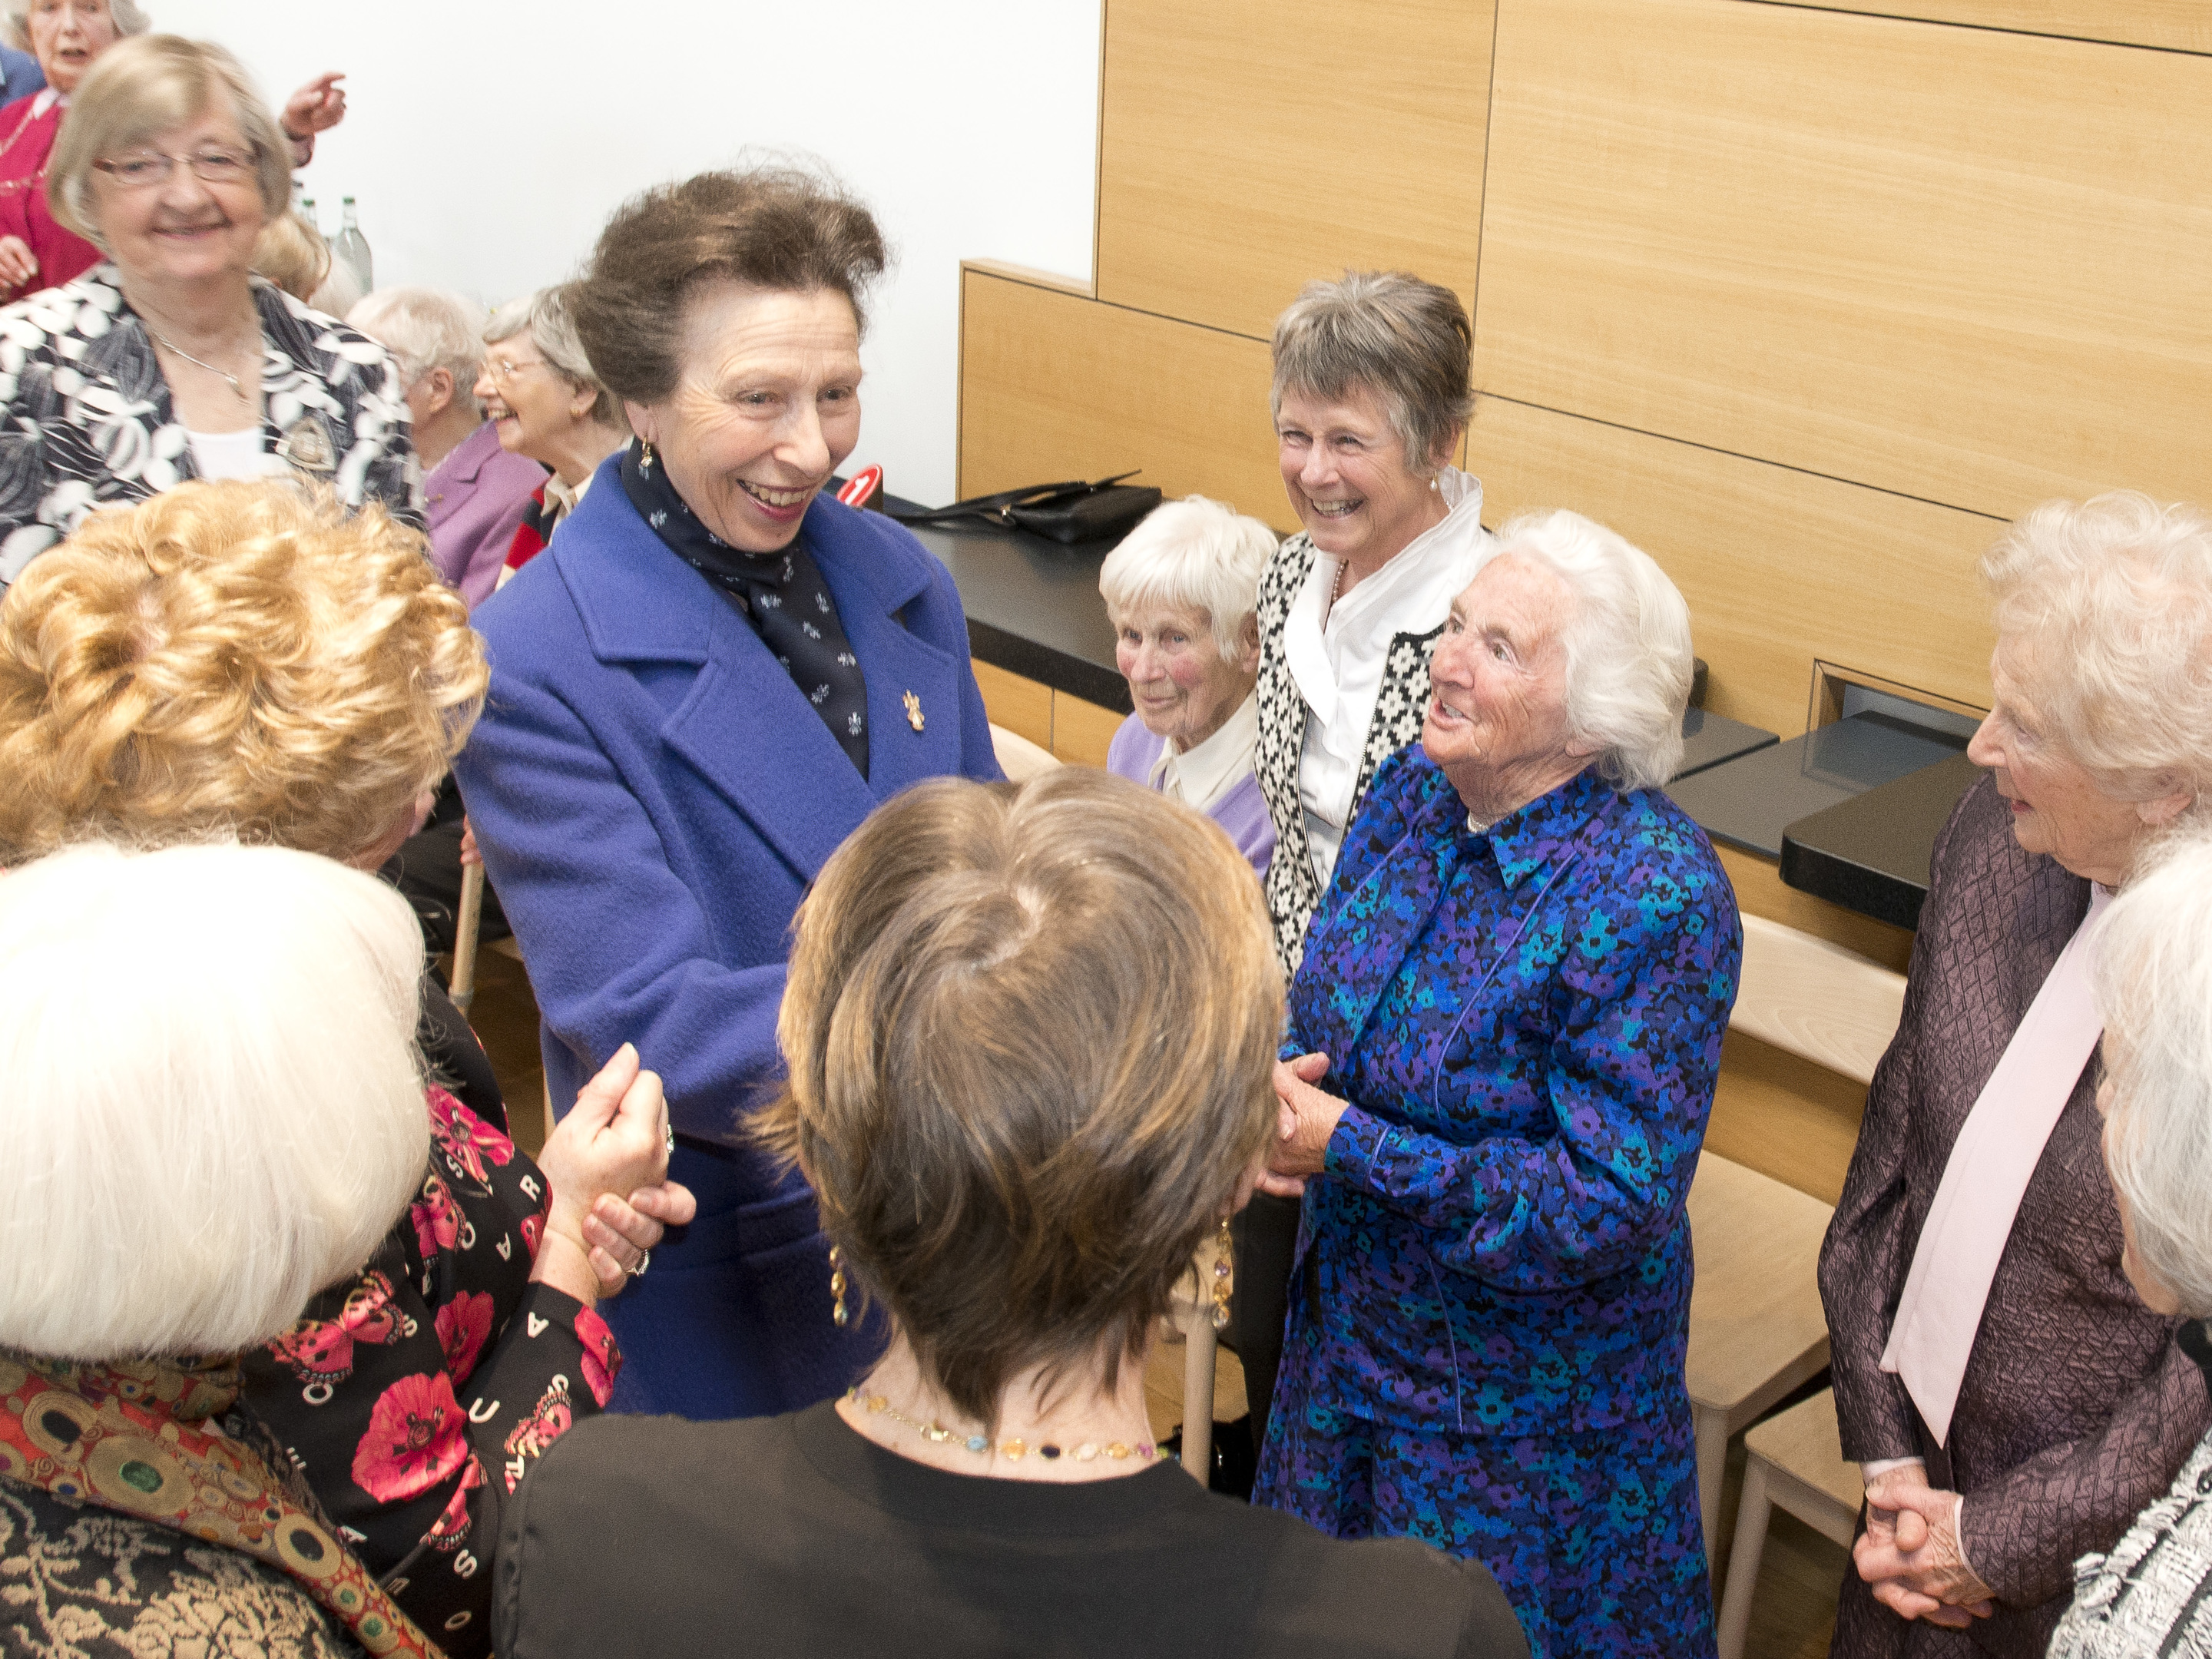 The Princess Royal met members of St Andrews Ladies' Putting Club as she opened their exhibition at the British Golf Museum